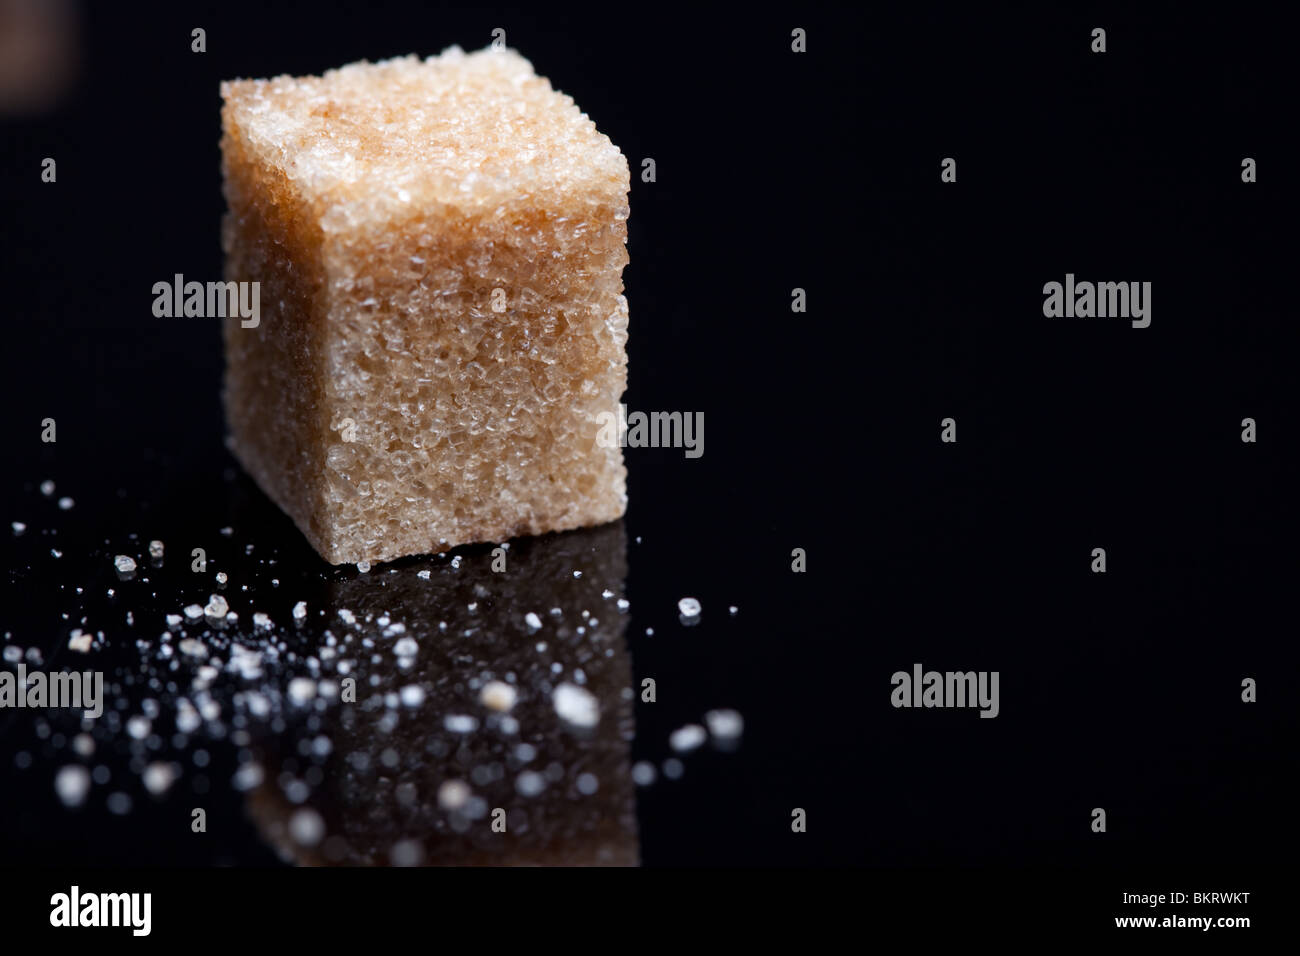 A single brown sugar cube and some sugar granules on a black reflective surface Stock Photo